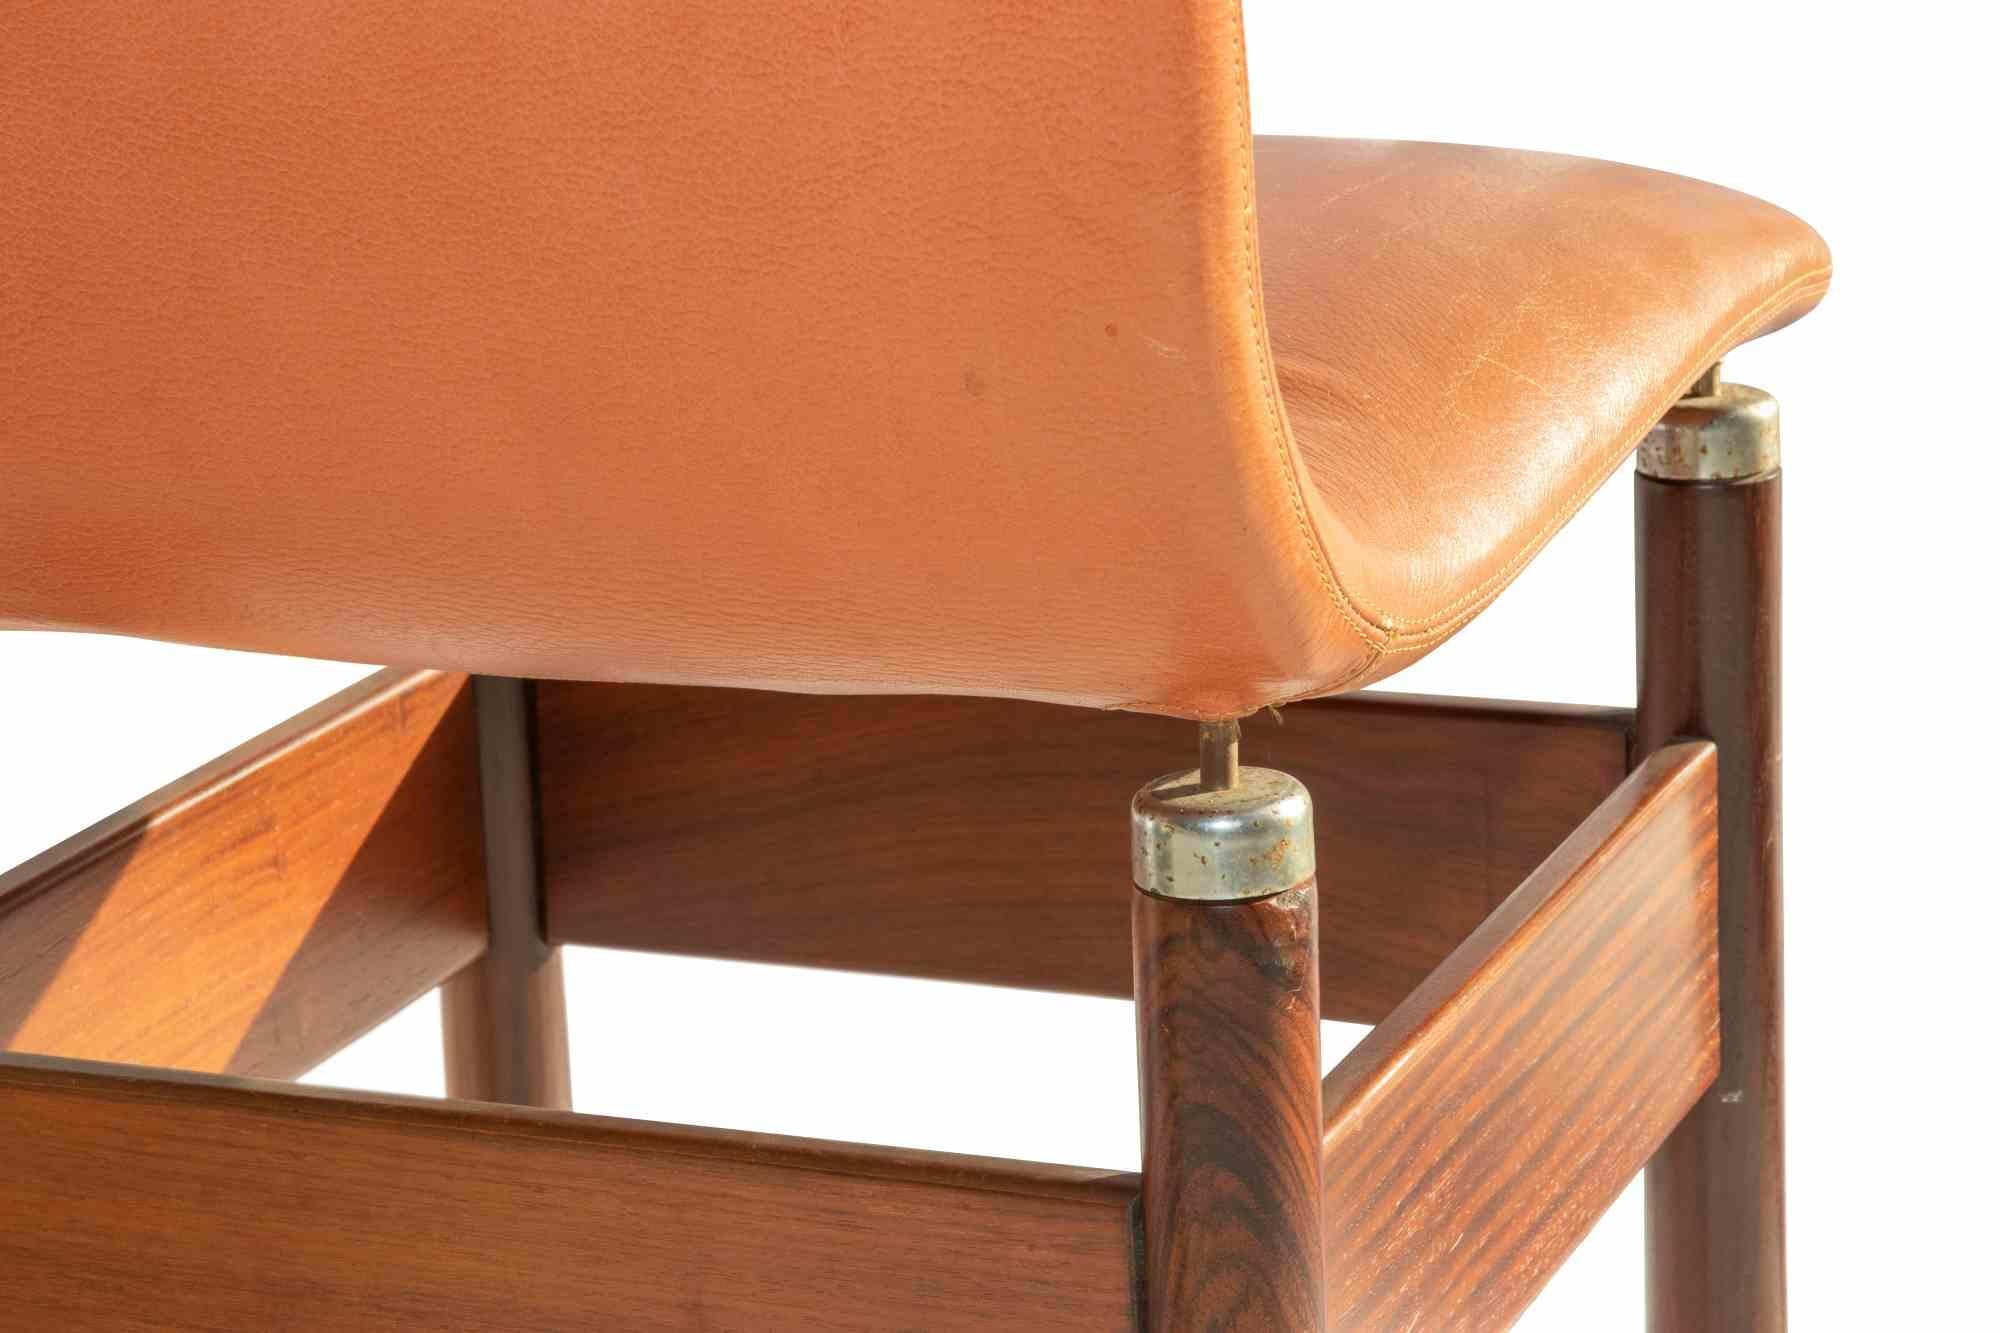 Chelsea Chair is a design furniture item realized by Vittorio Introini for Saporiti in 1966.

Solid wood structure with leather seat.

Rare and in good condition, with just minor signs of age.
 